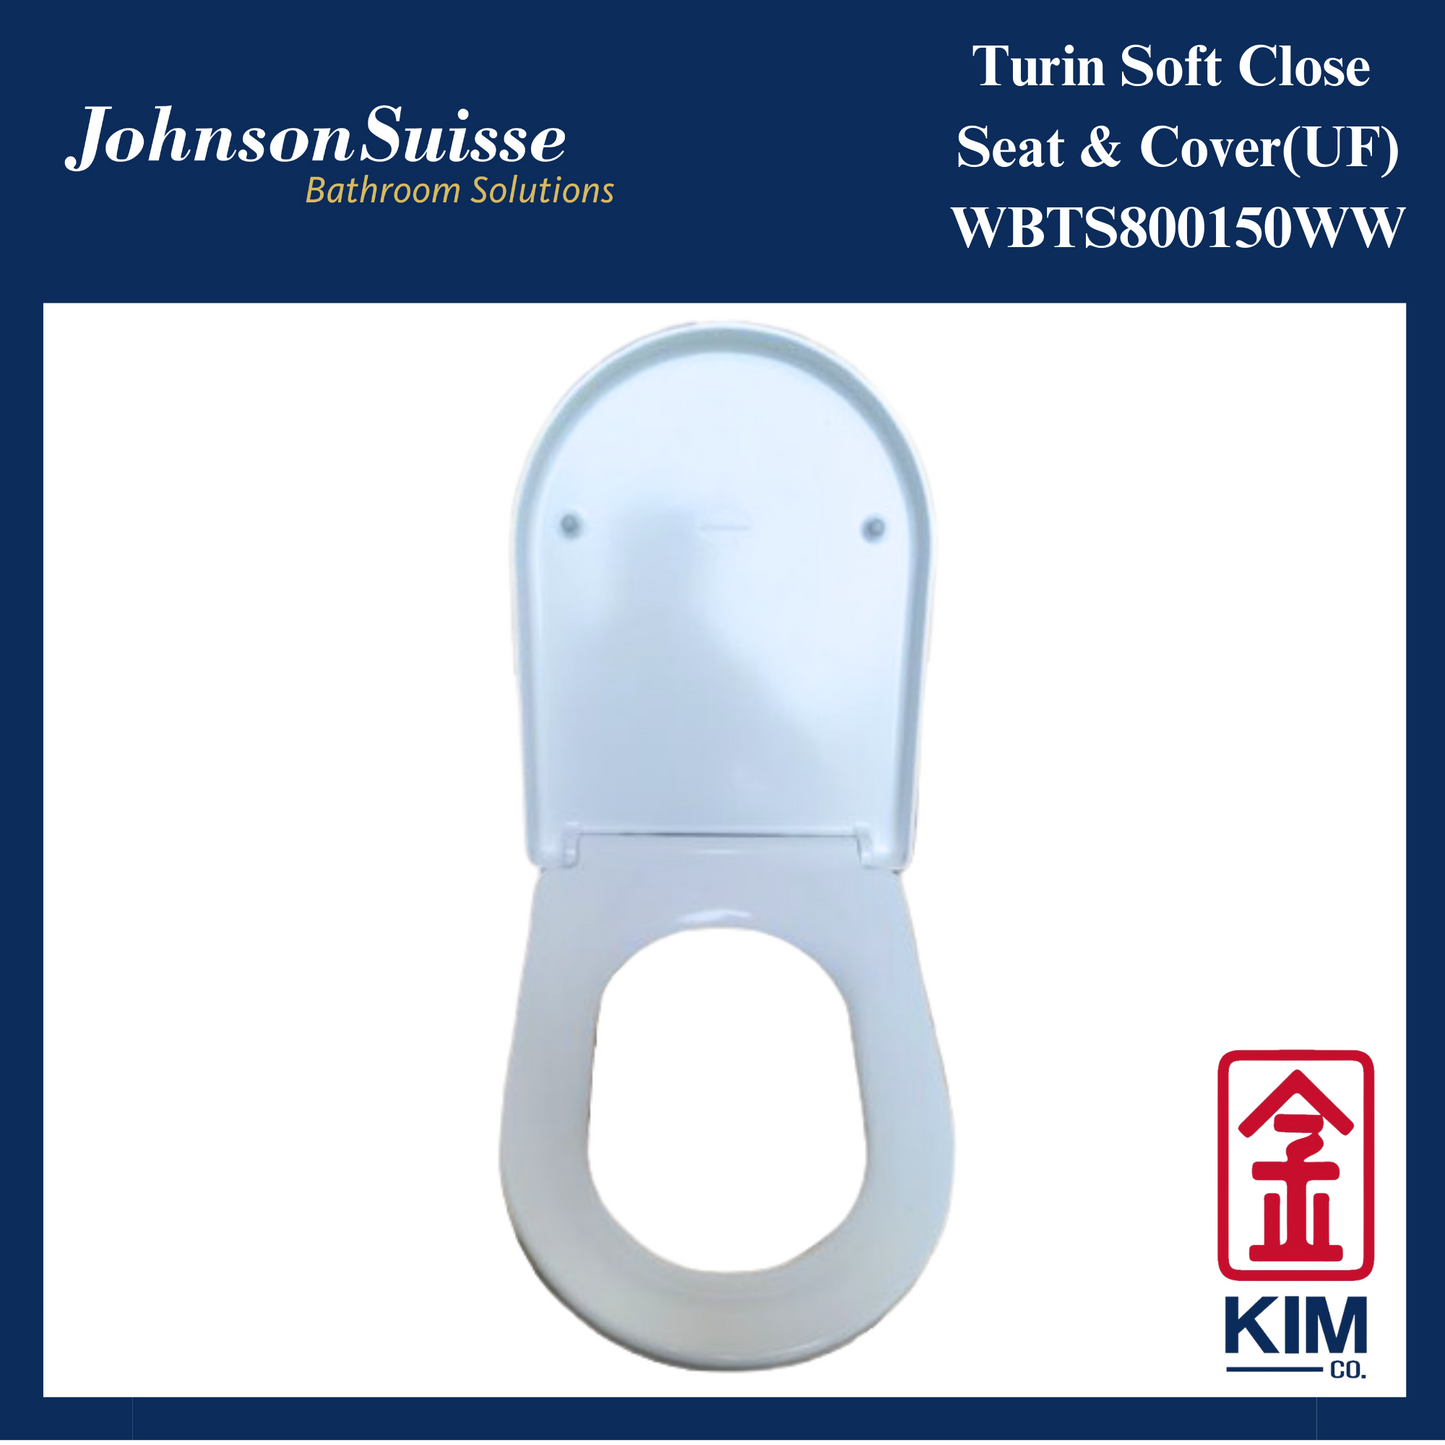 Johnson Suisse Turin/ Erika/ Lucca Soft Close Seat & Cover (UF)(WBTS800150WW)